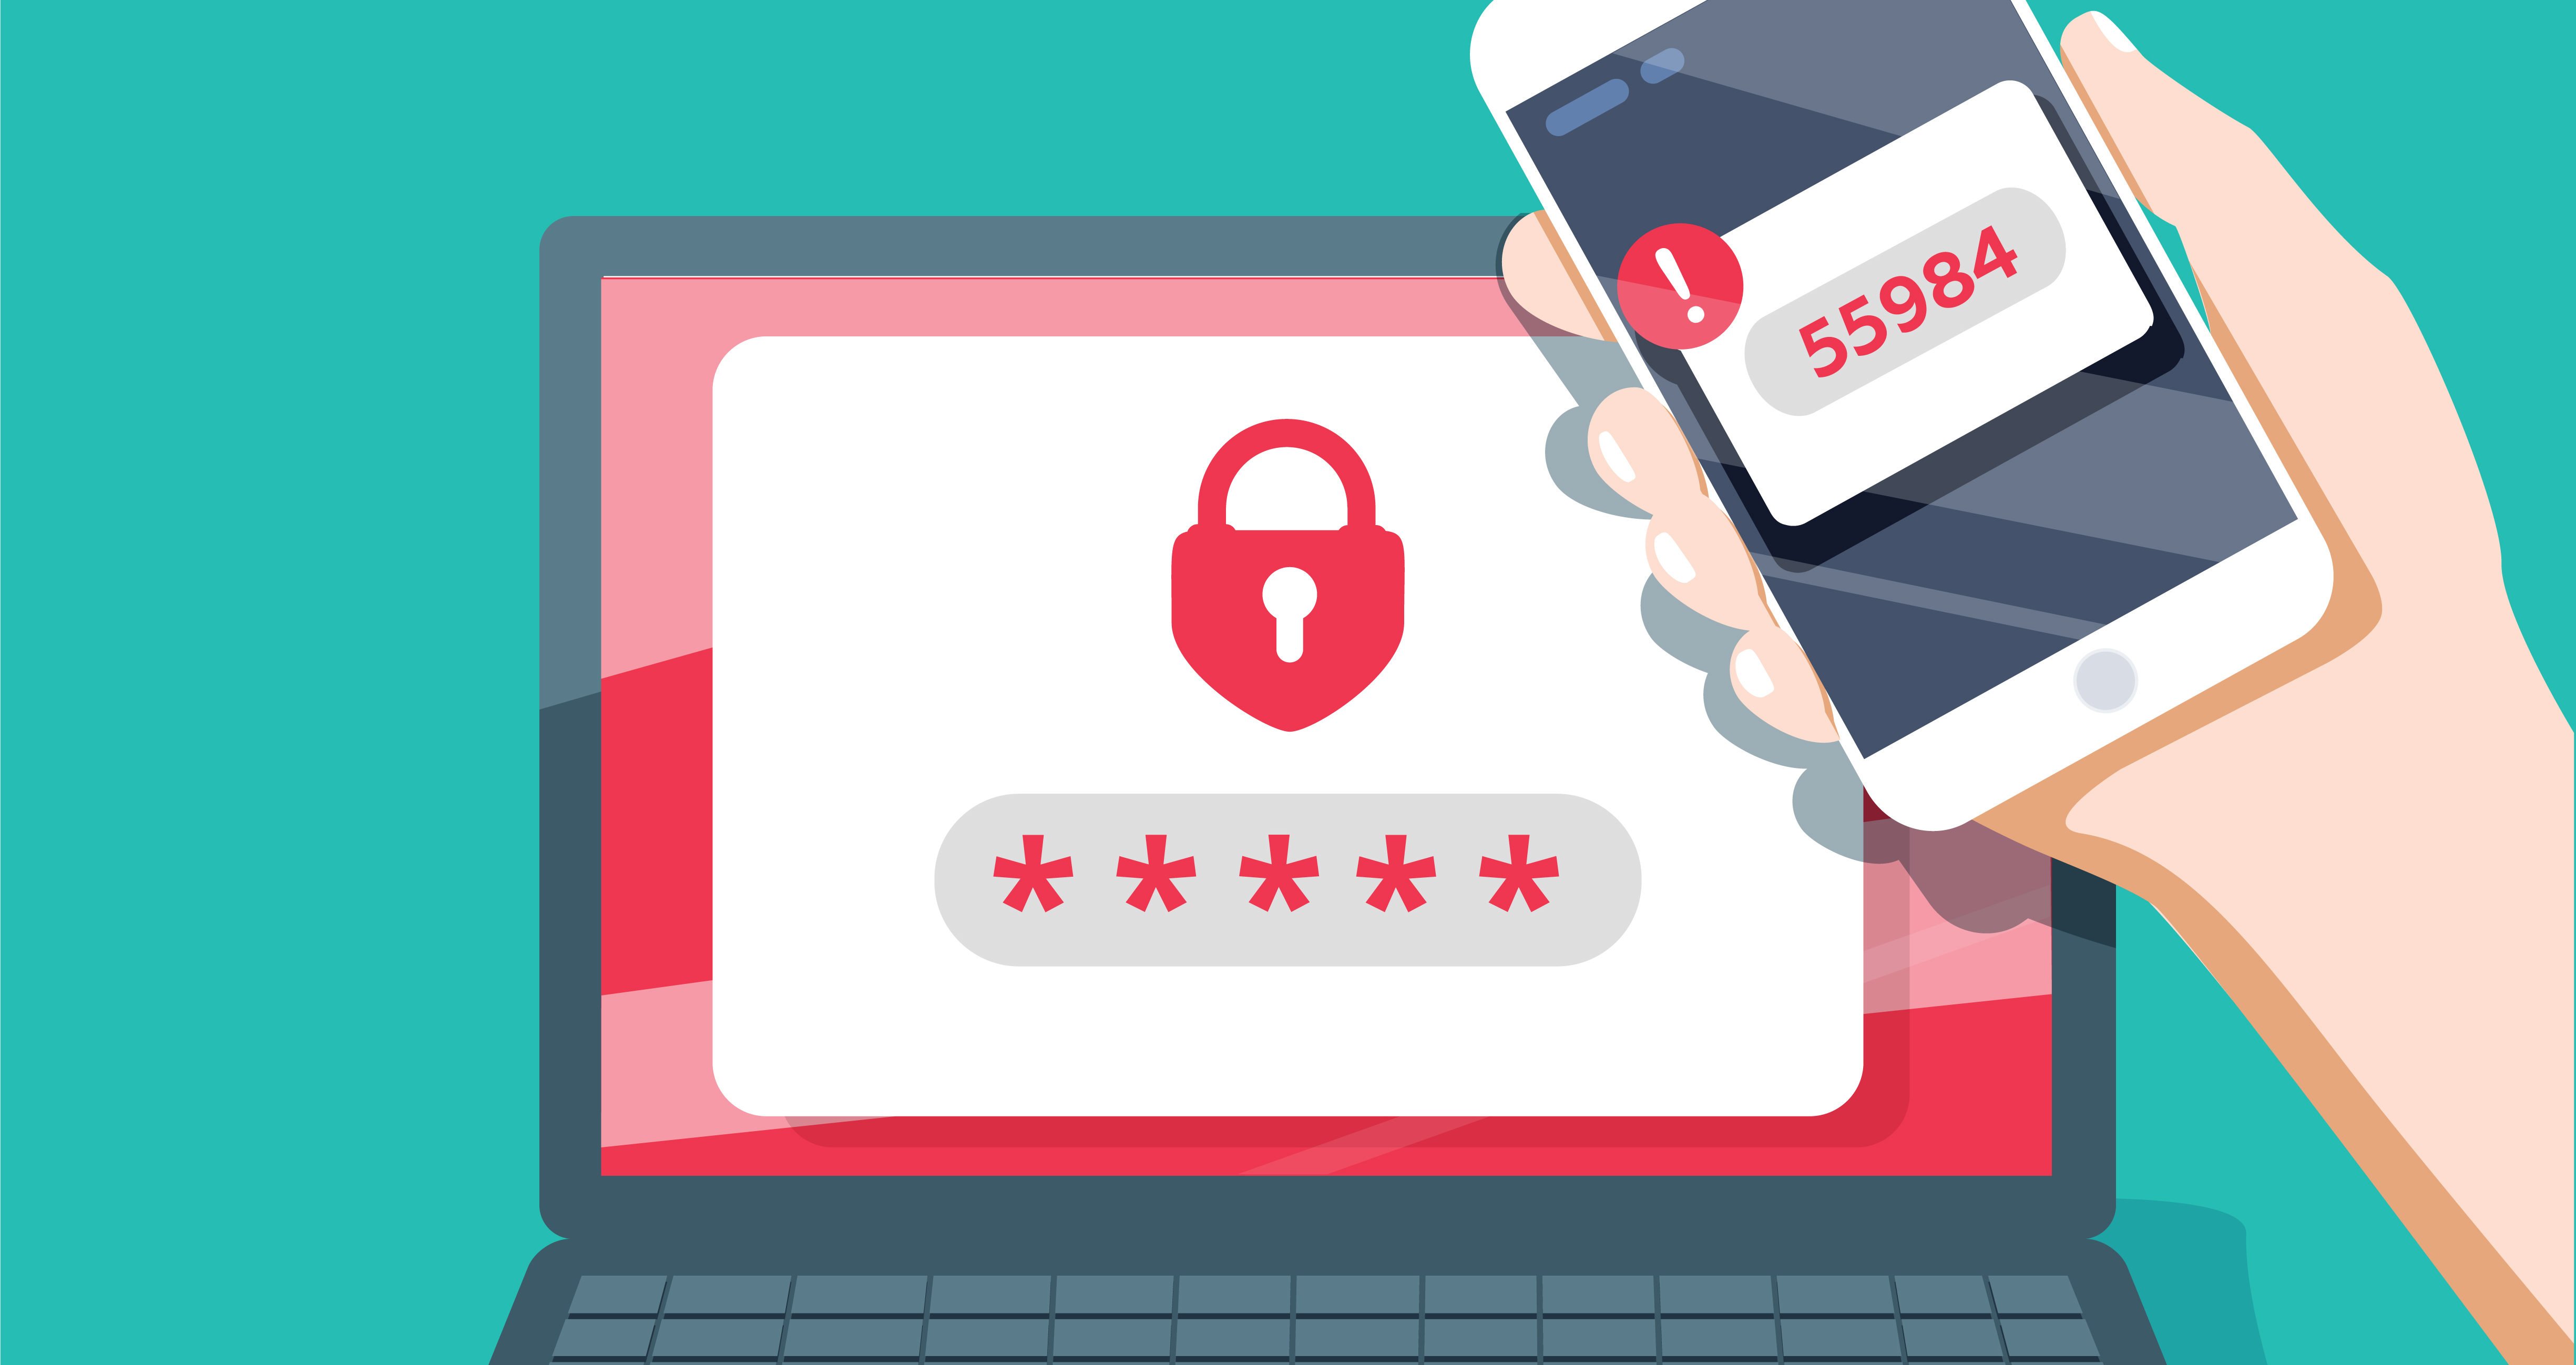 What’s a two-factor authentication?